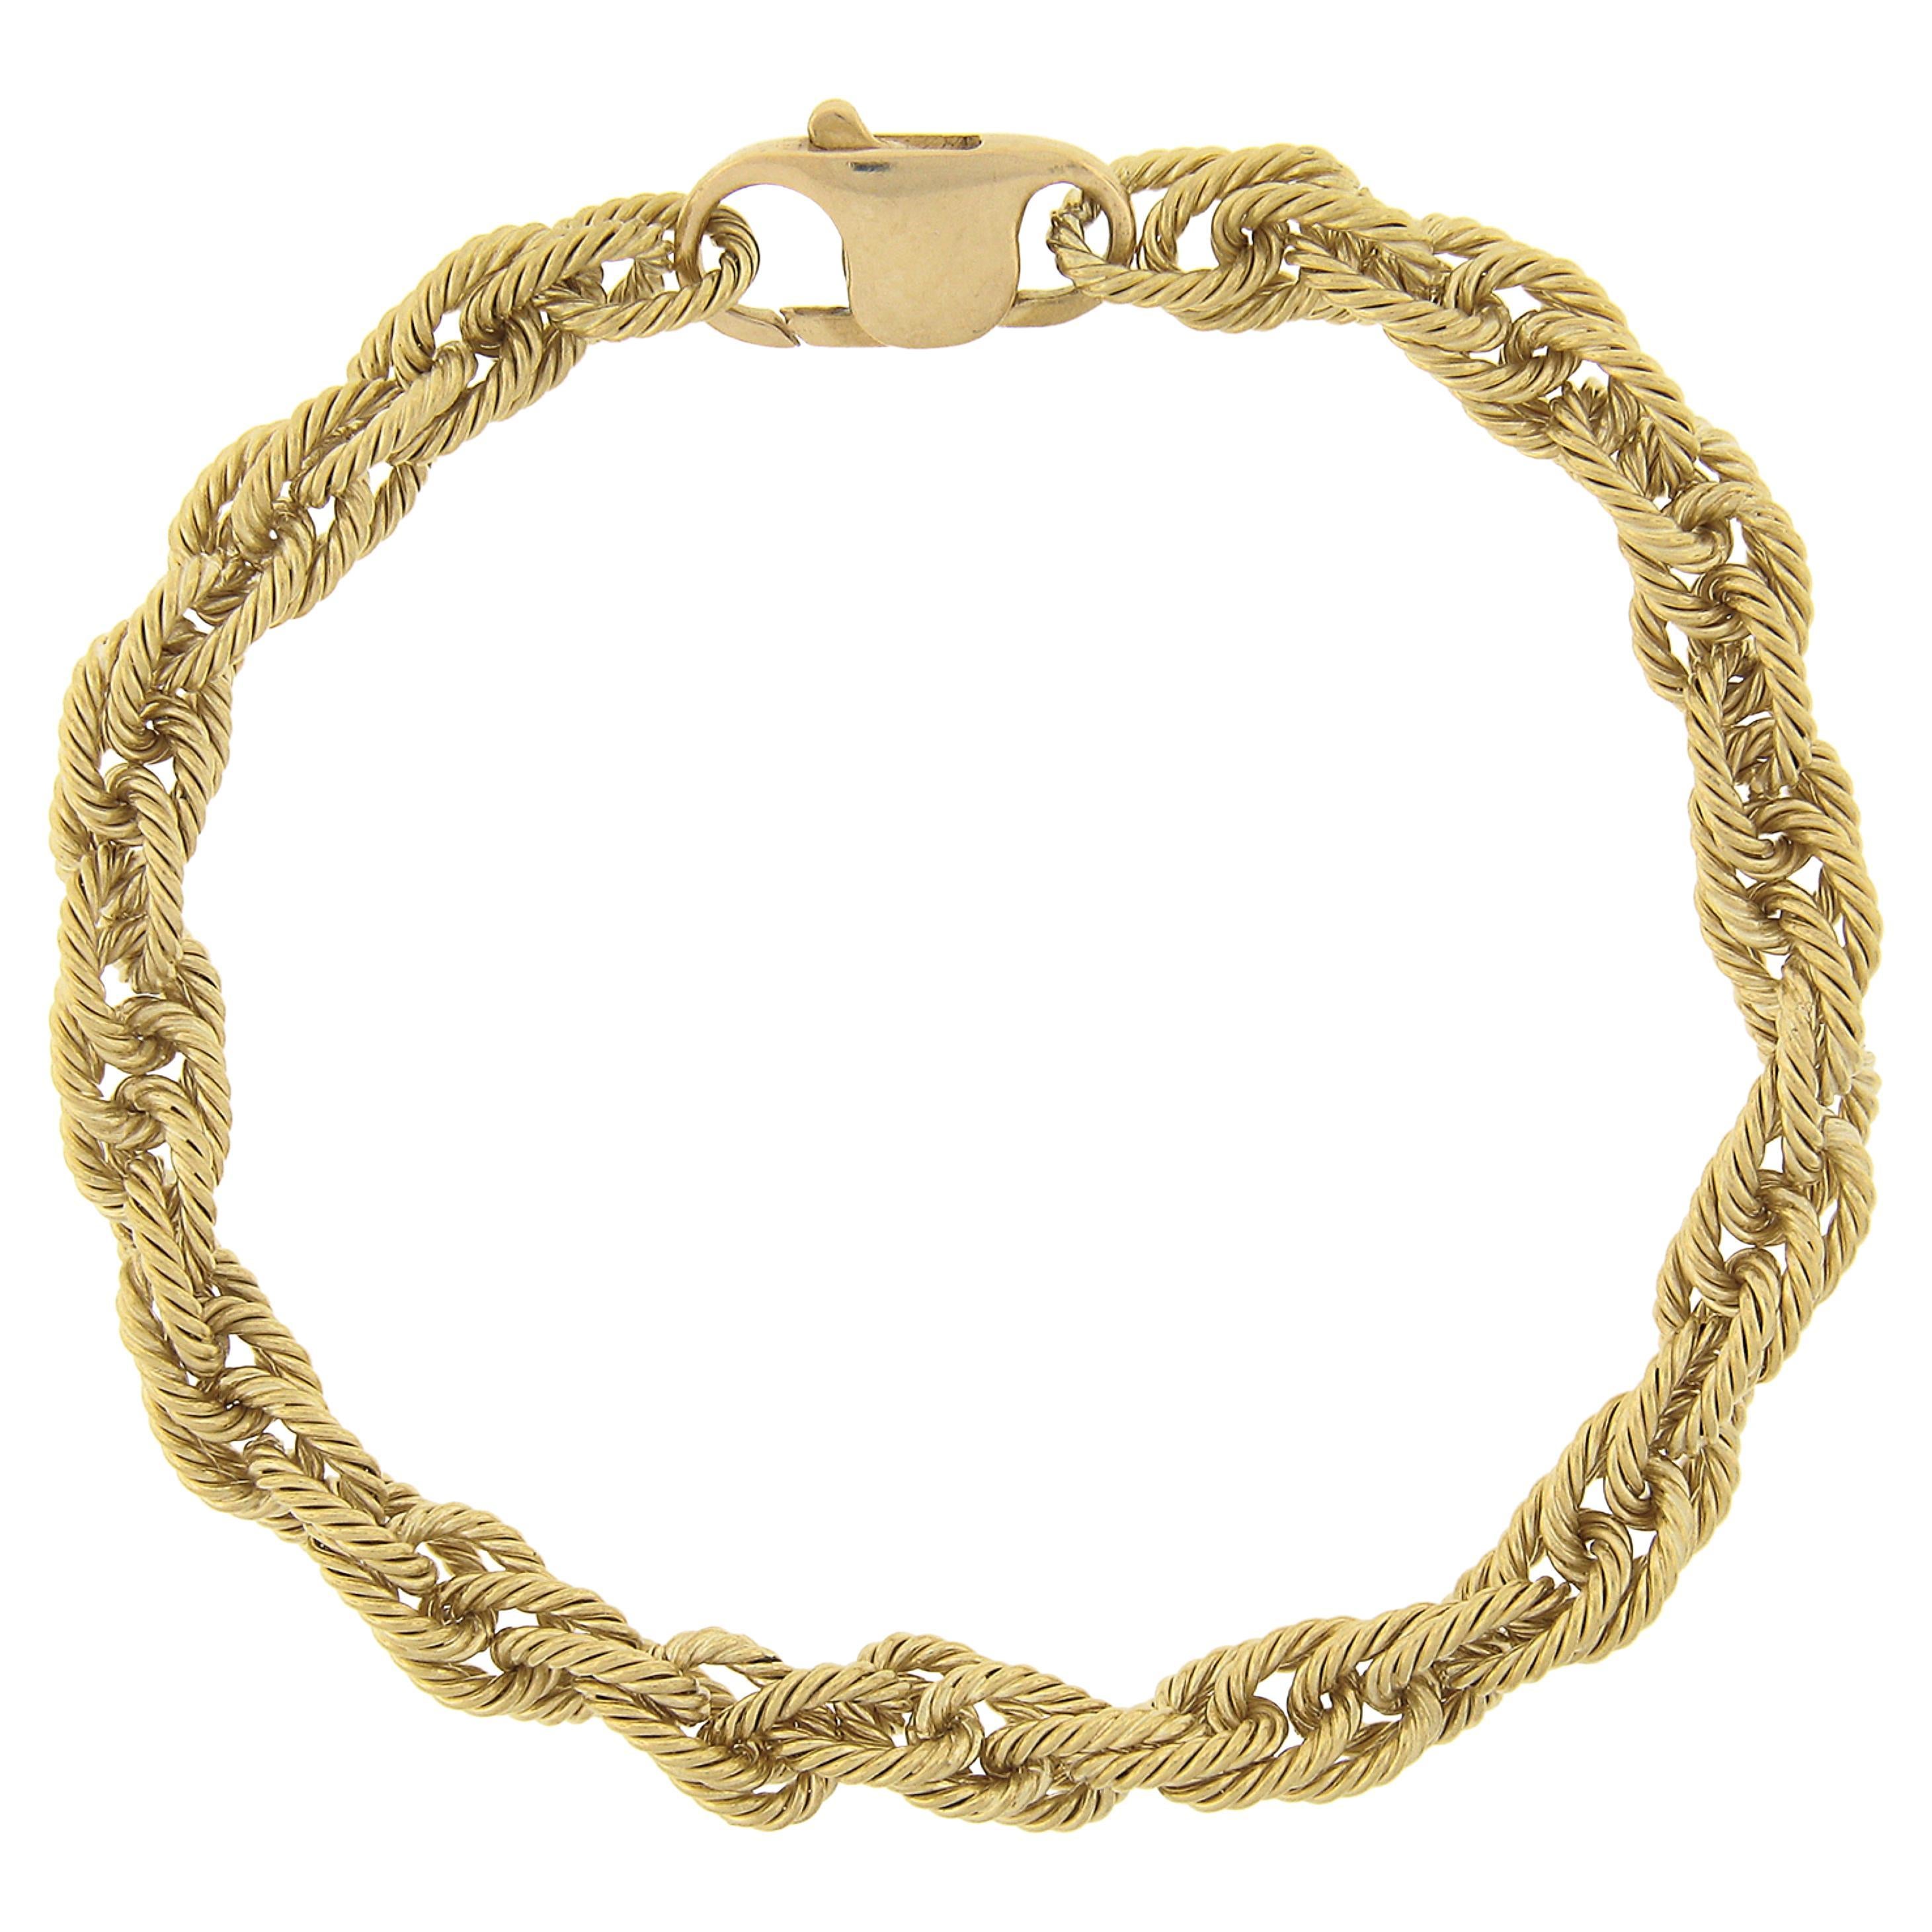 18k Yellow Gold Woven Textured Interlocking Cable Link Bracelet w/ Large Clasp